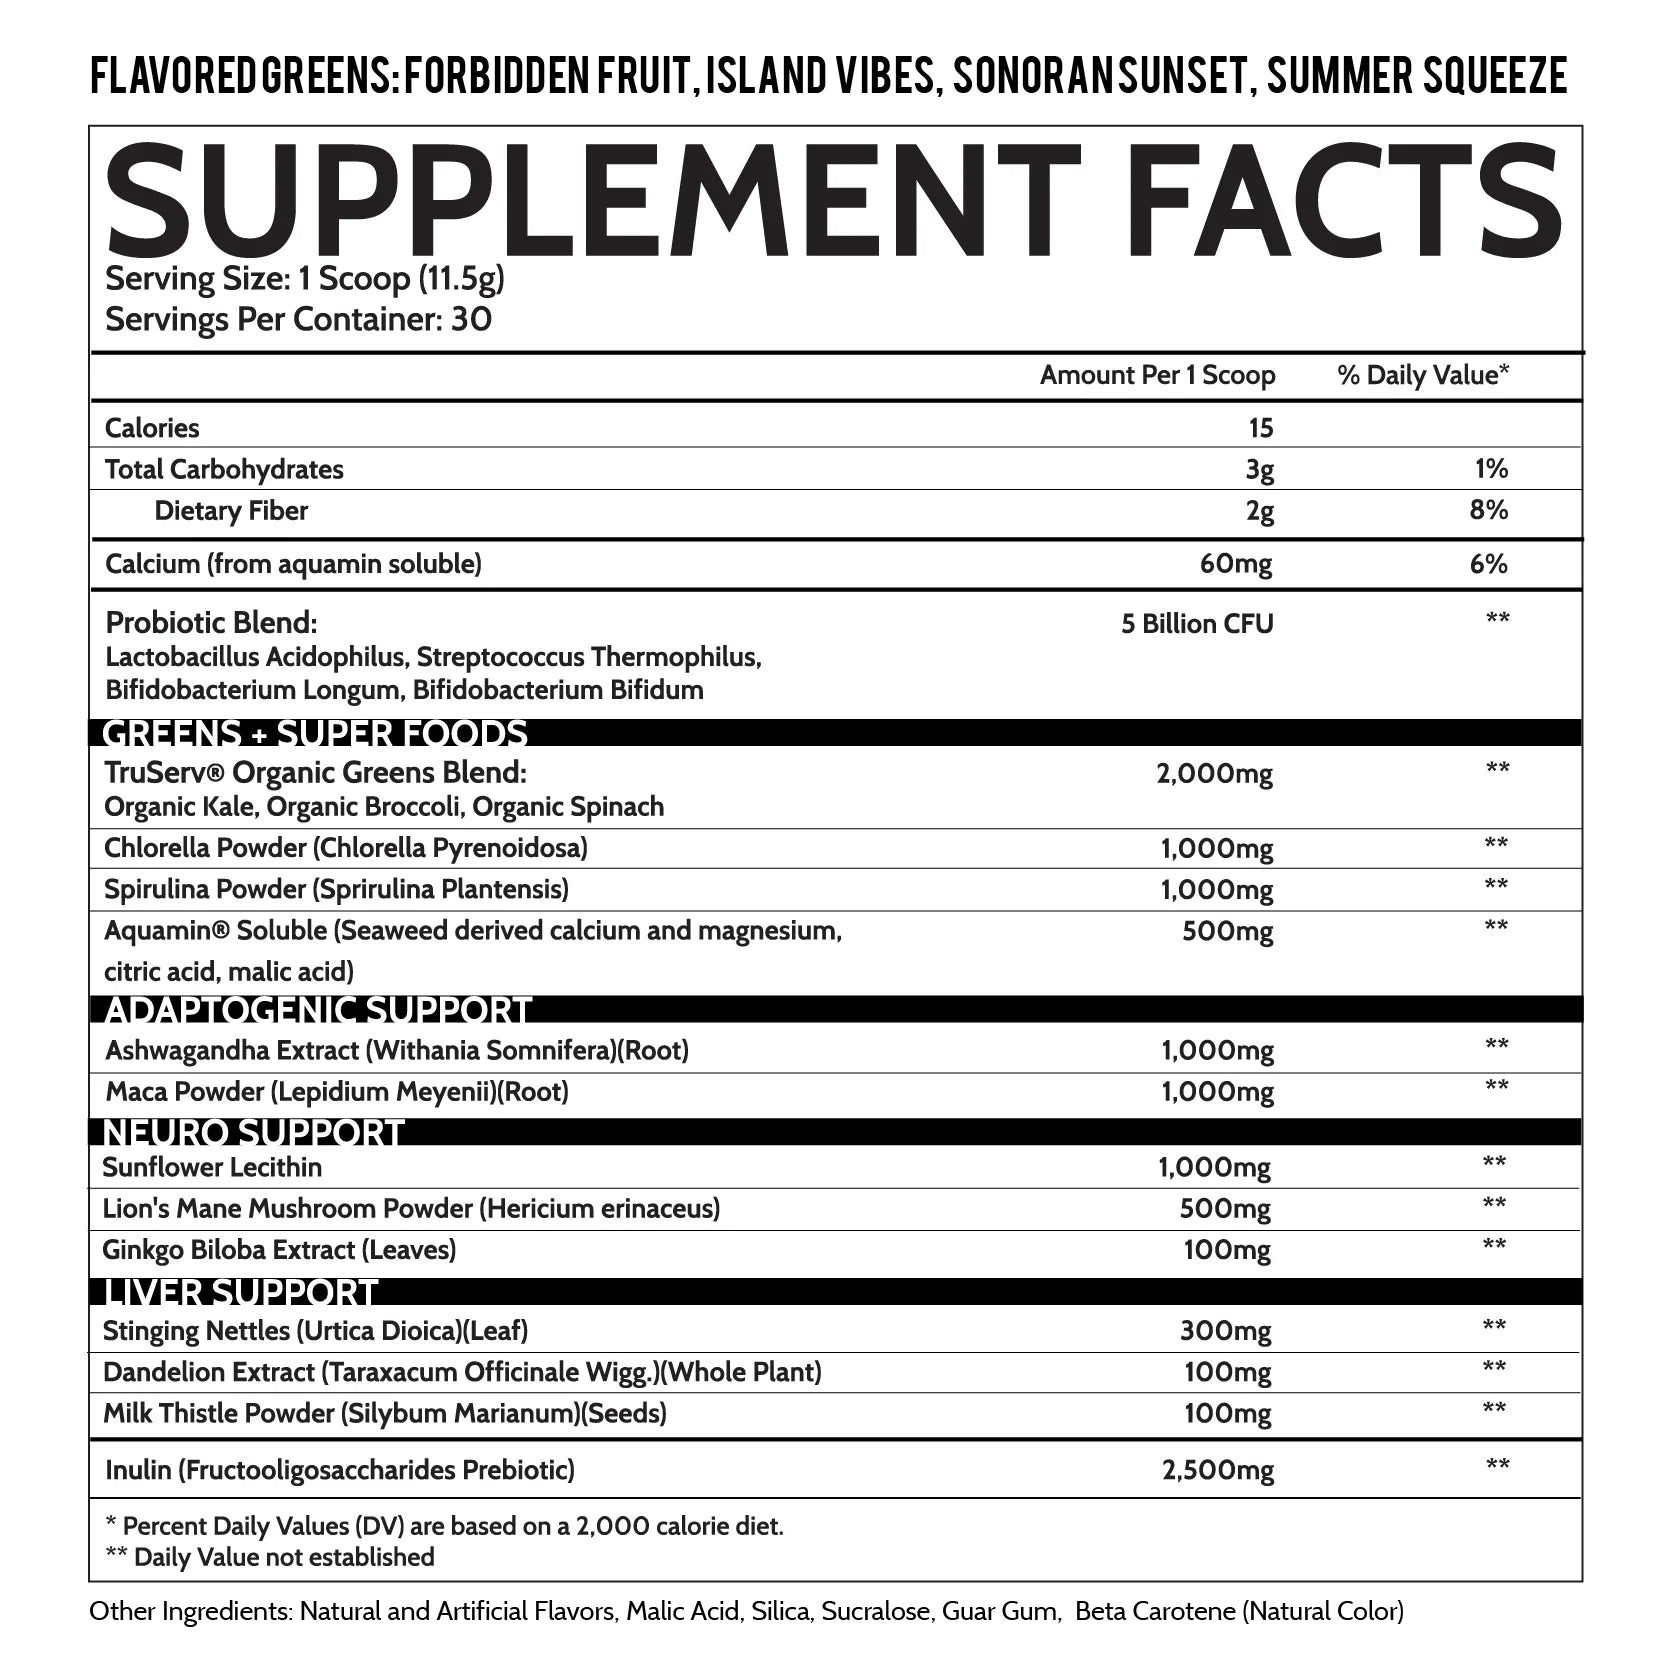 InspiredNutraceuticals- GREENS Superfood Wellness Formula - Krazy Muscle Nutrition Krazy Muscle Nutrition10103